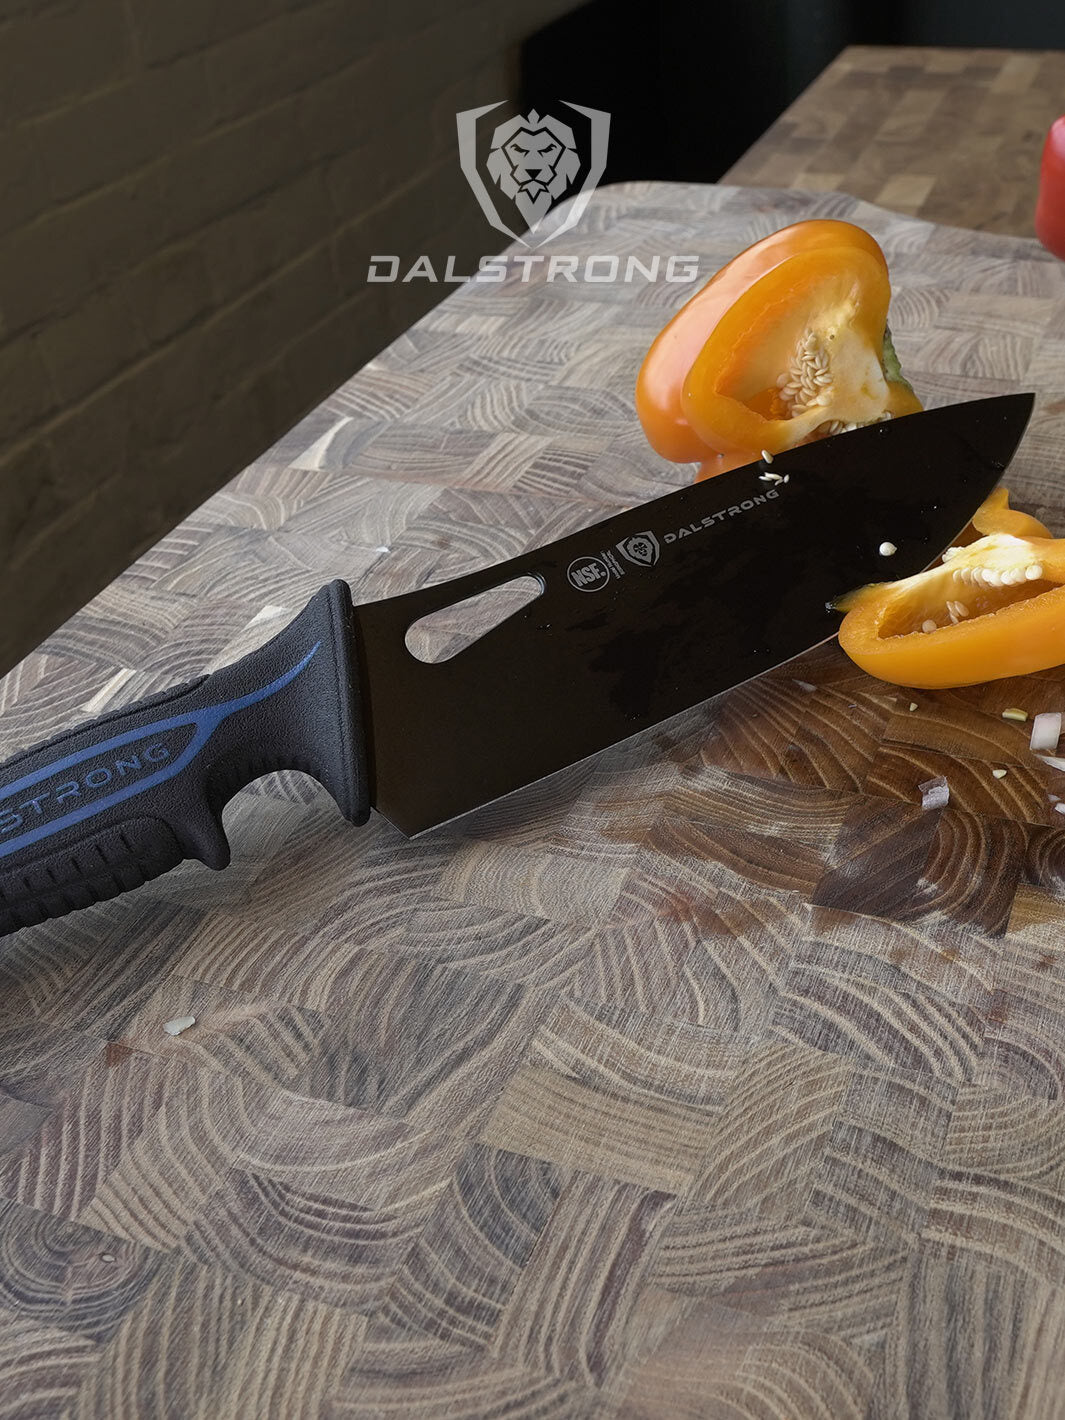 What Is The Sharpest Knife In The World? – Dalstrong